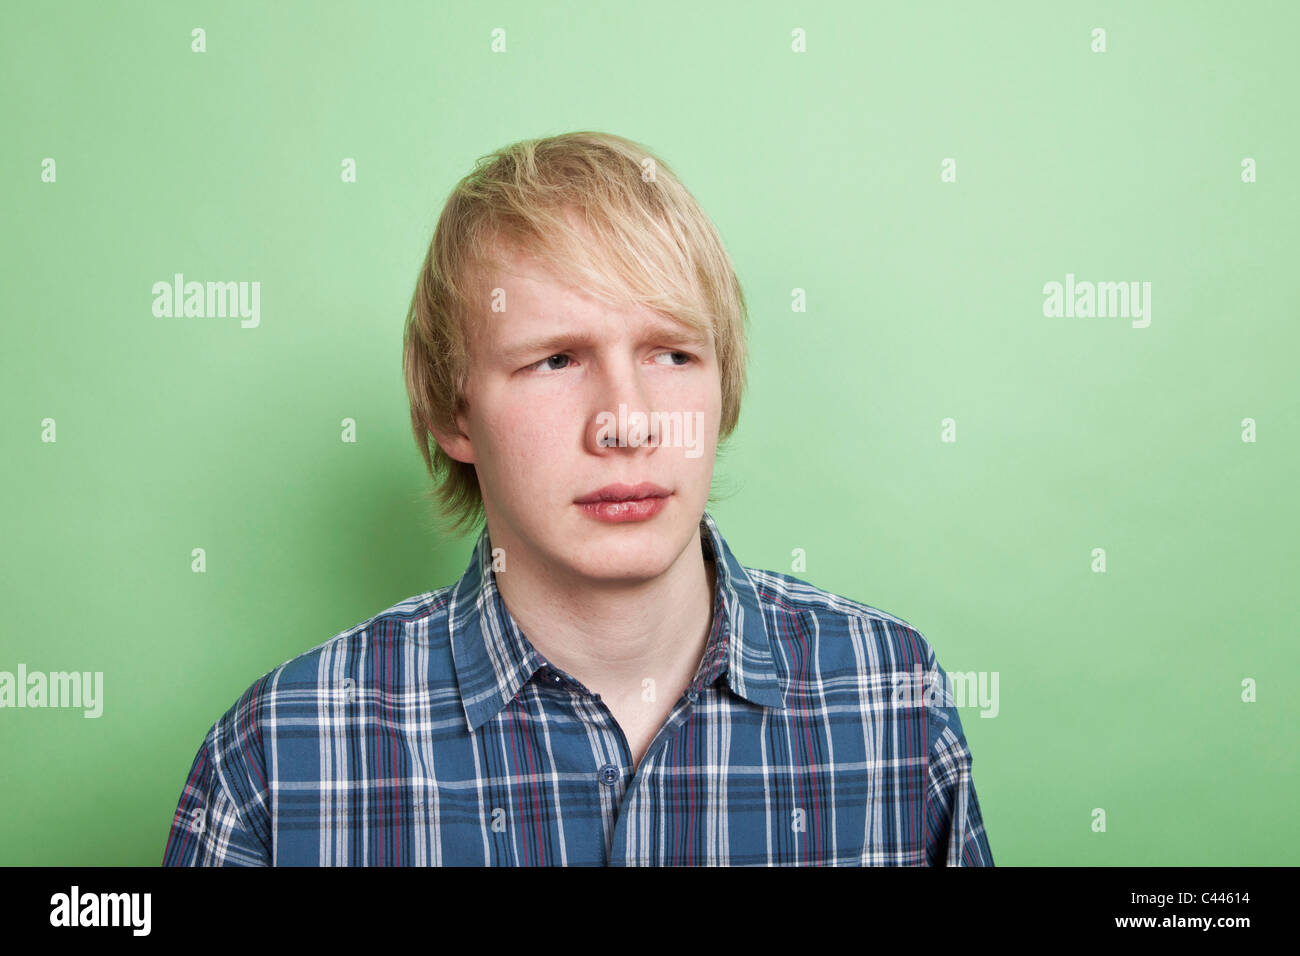 A teenage boy looking off to the side with suspicion, portrait, studio shot Stock Photo